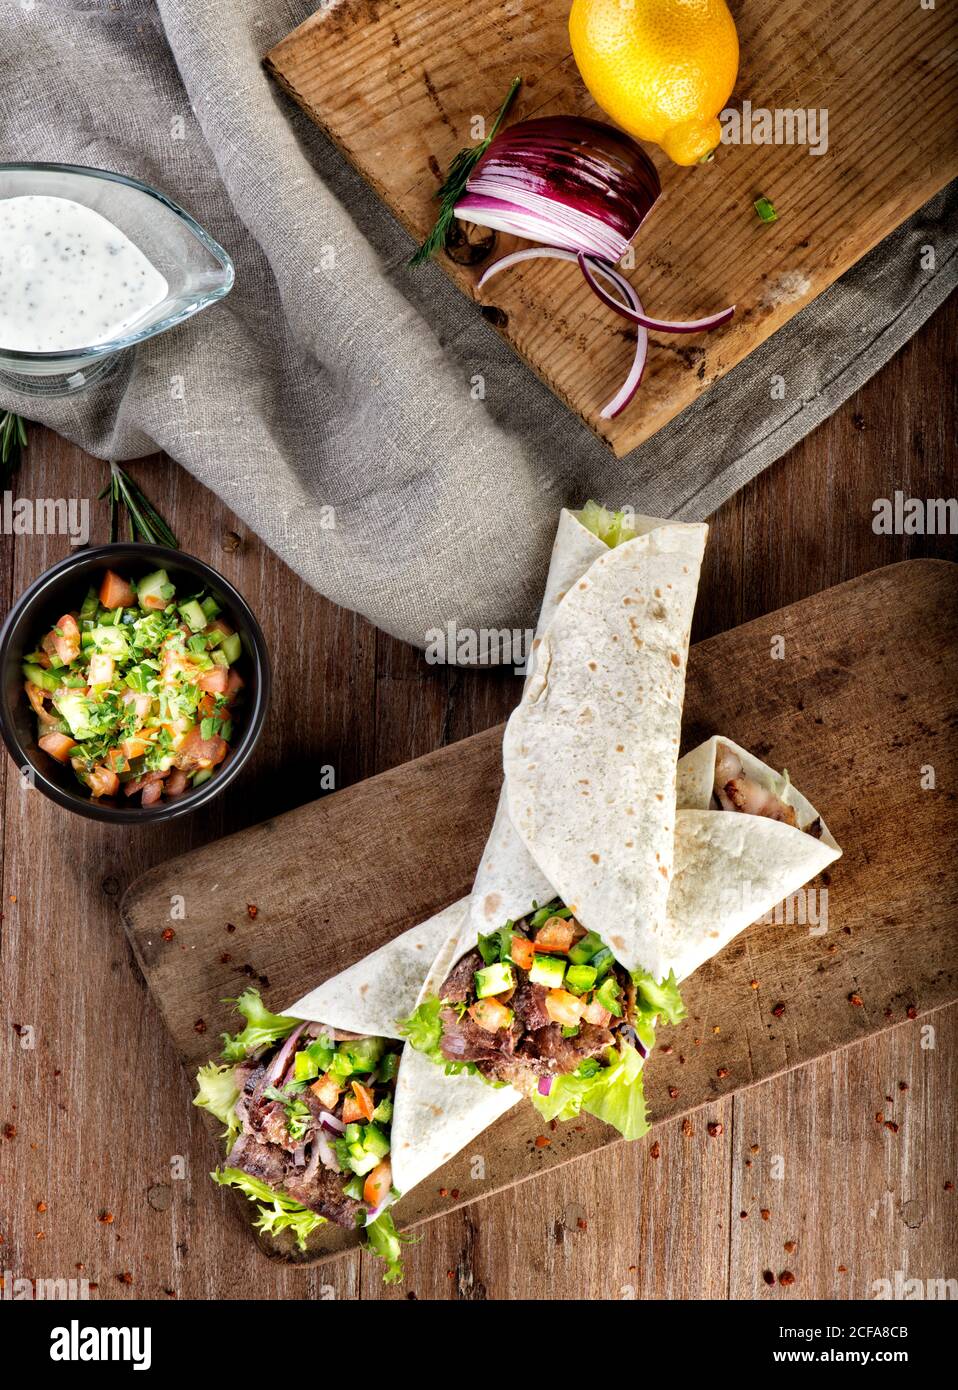 Top view of traditional Turkish snack durum made with wrapped flatbread filled with doner kebab with lamb meat and vegetables served on wooden table Stock Photo